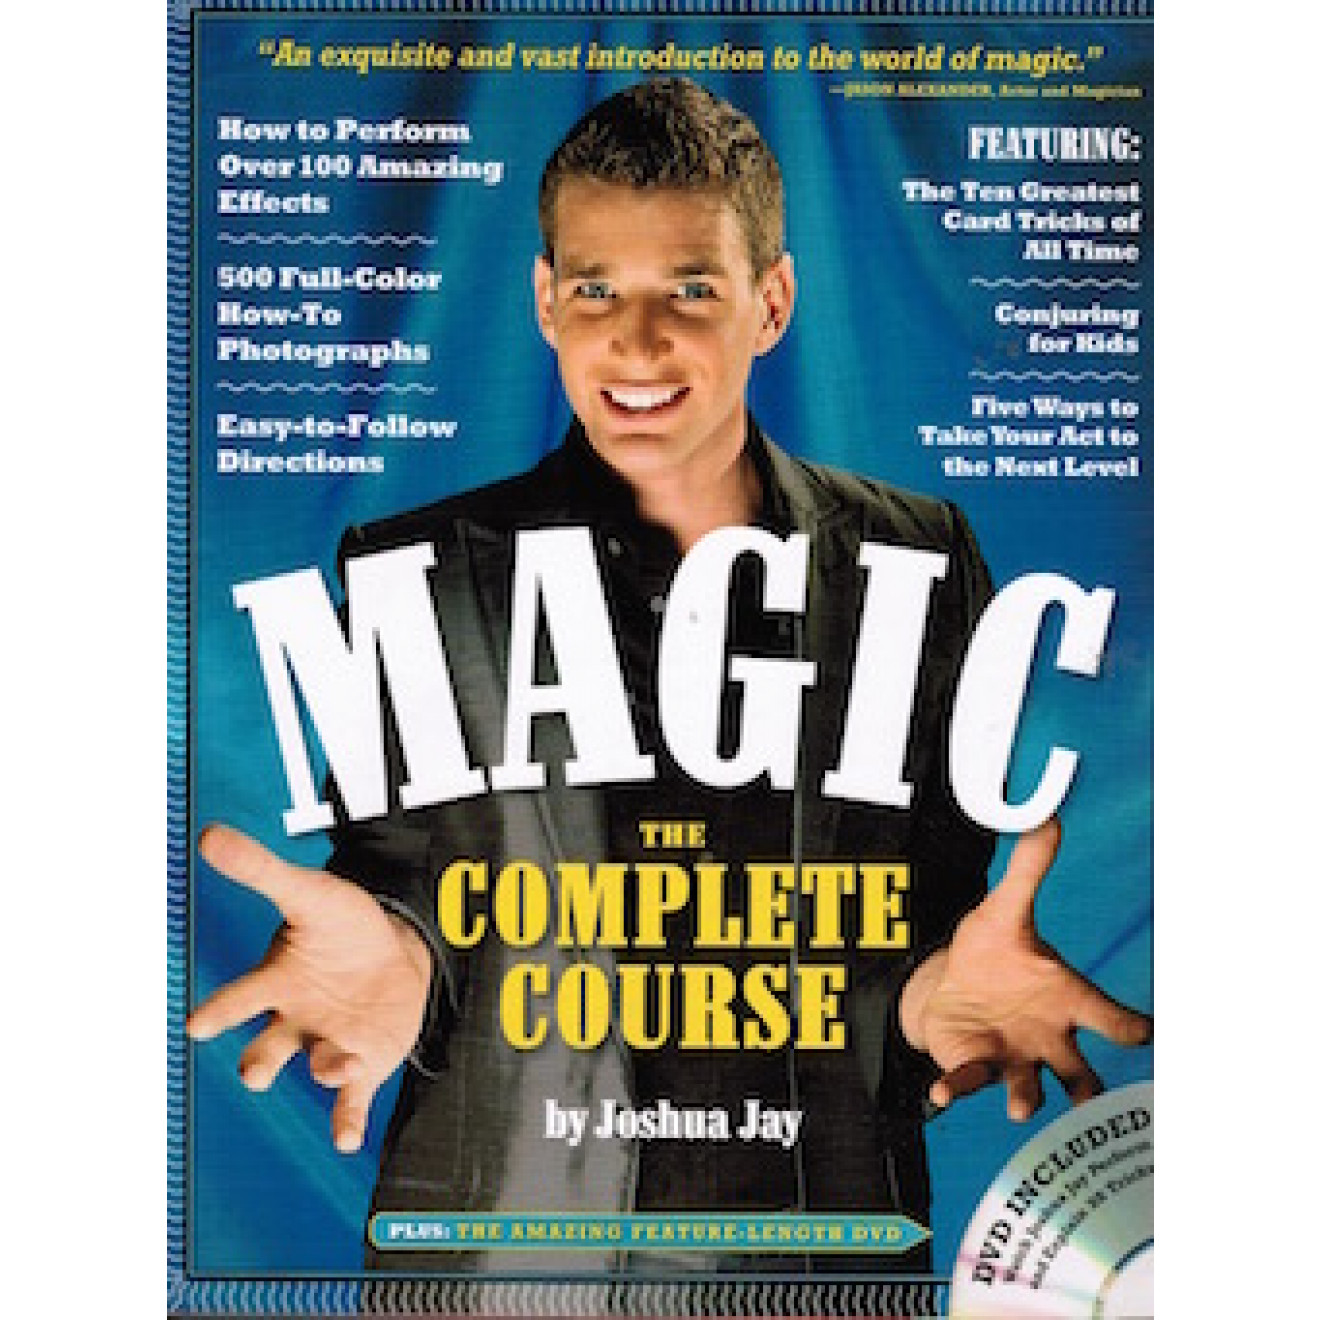 Magic - The Complete Course by Joshua Jay